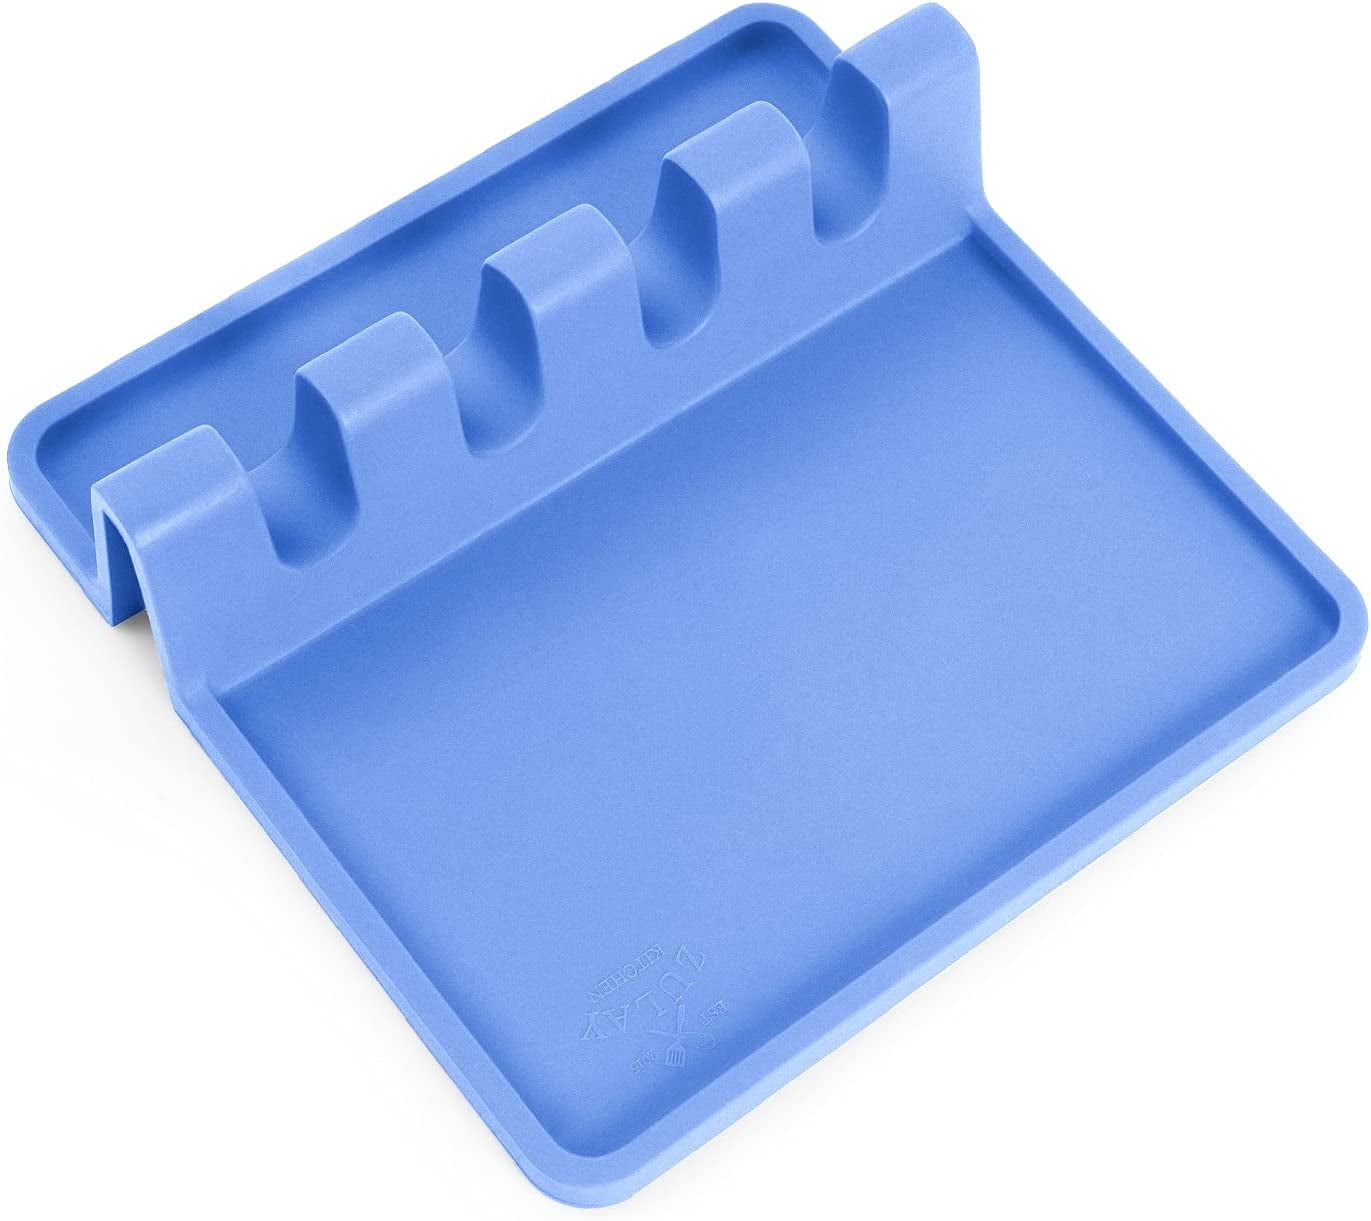 Zulay Kitchen Silicone Multipurpose Tray Holder Gray